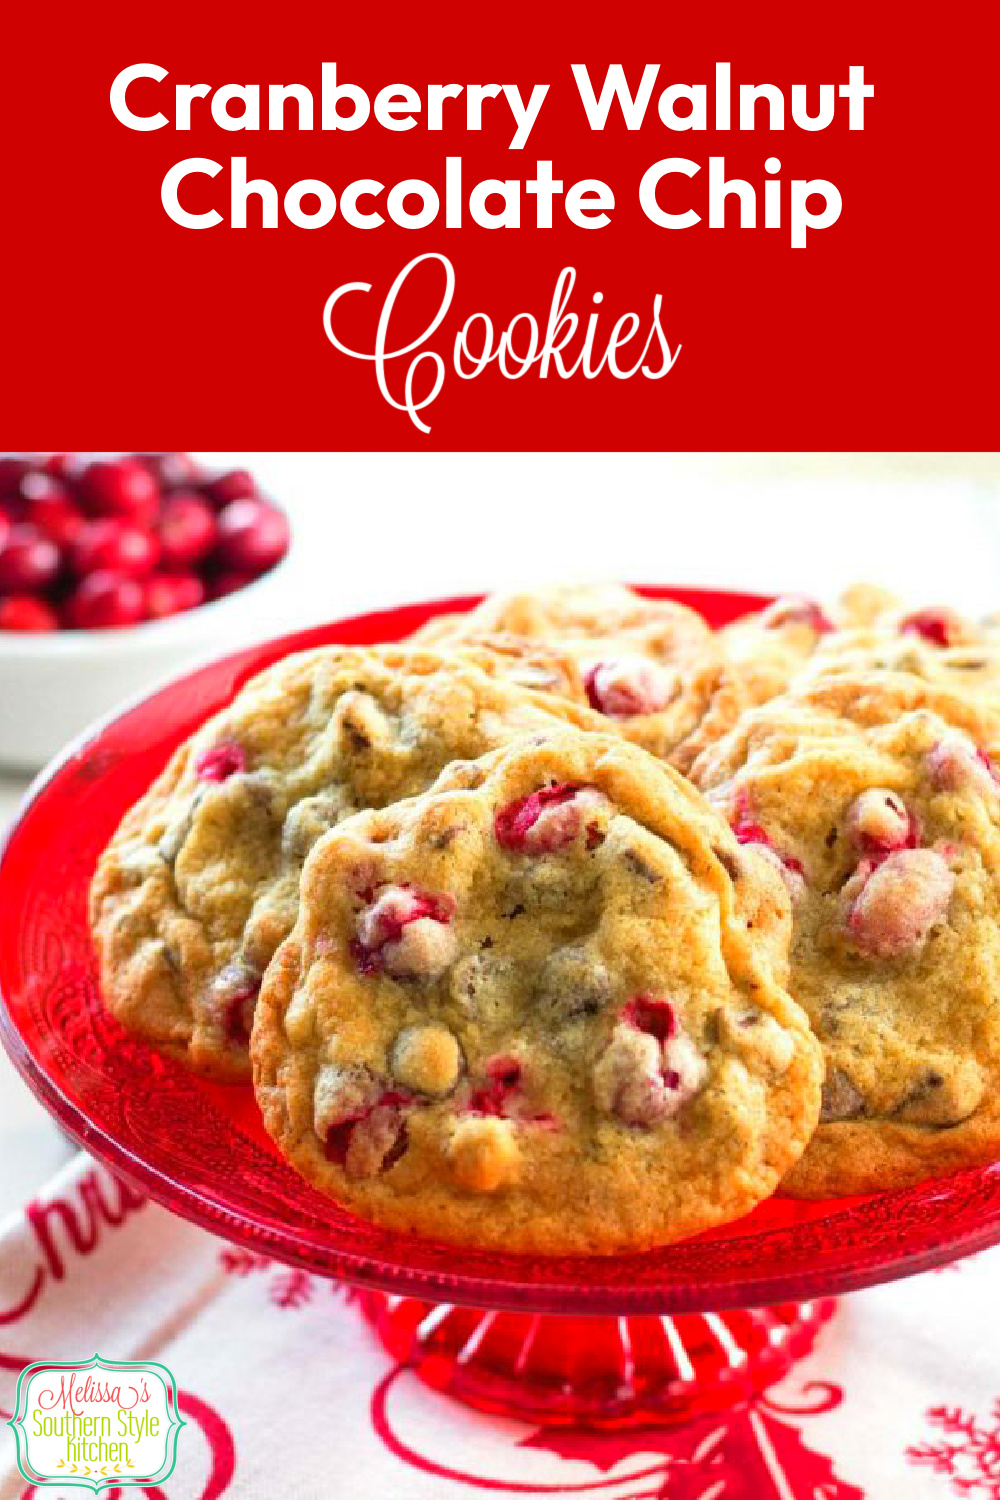 Add these festive Cranberry Walnut Chocolate Chip Cookies to your holiday baking plans #chocolatechipcookies #cranberries #cranberrycookies #cranberrycookierecipes #christmascookies #cookieswap